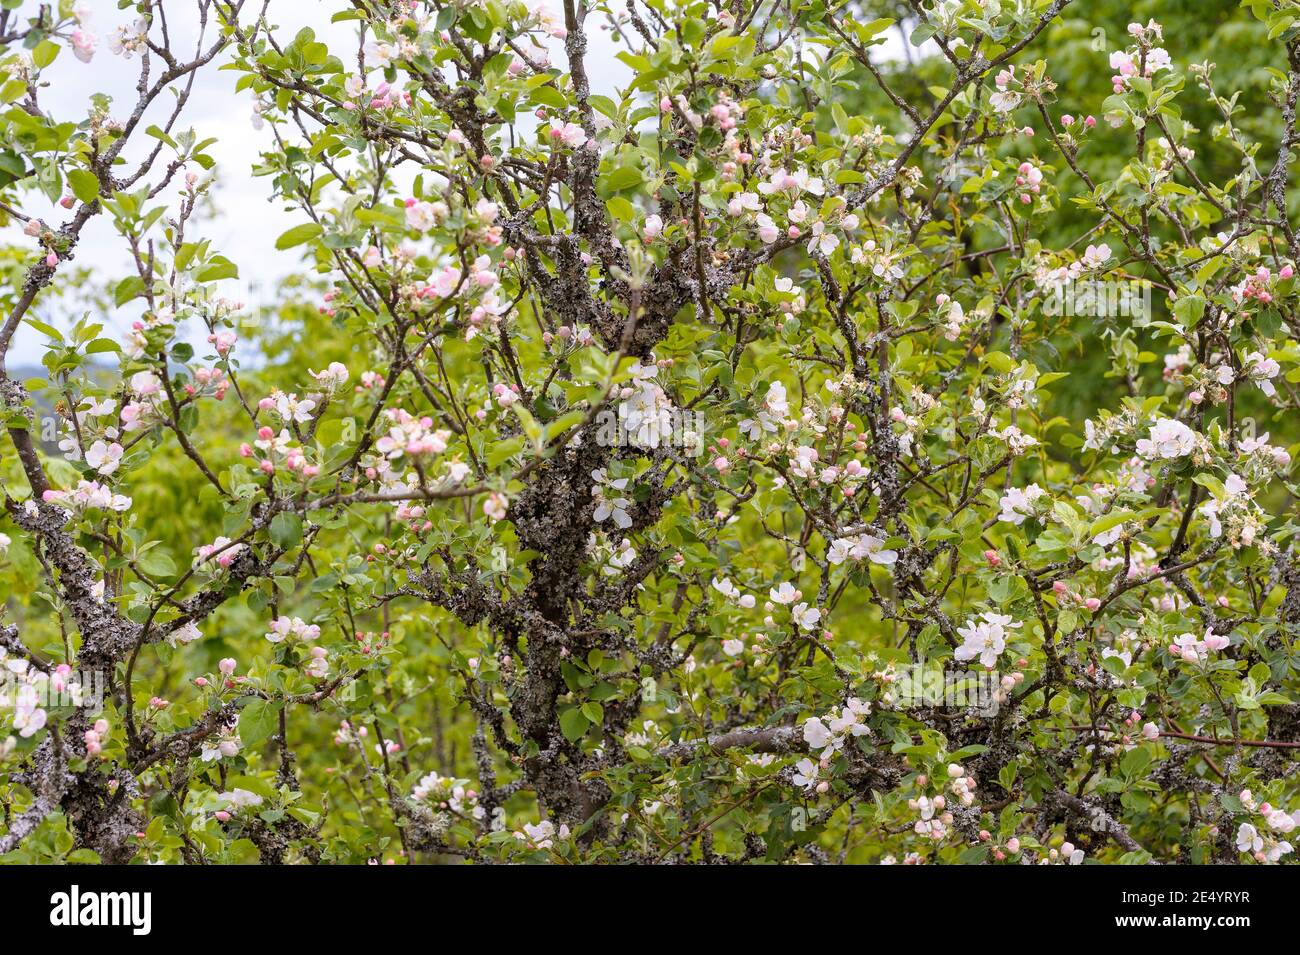 Old apple tree in bloom. Lichens have invaded the branches of the tree weakened by age. Stock Photo